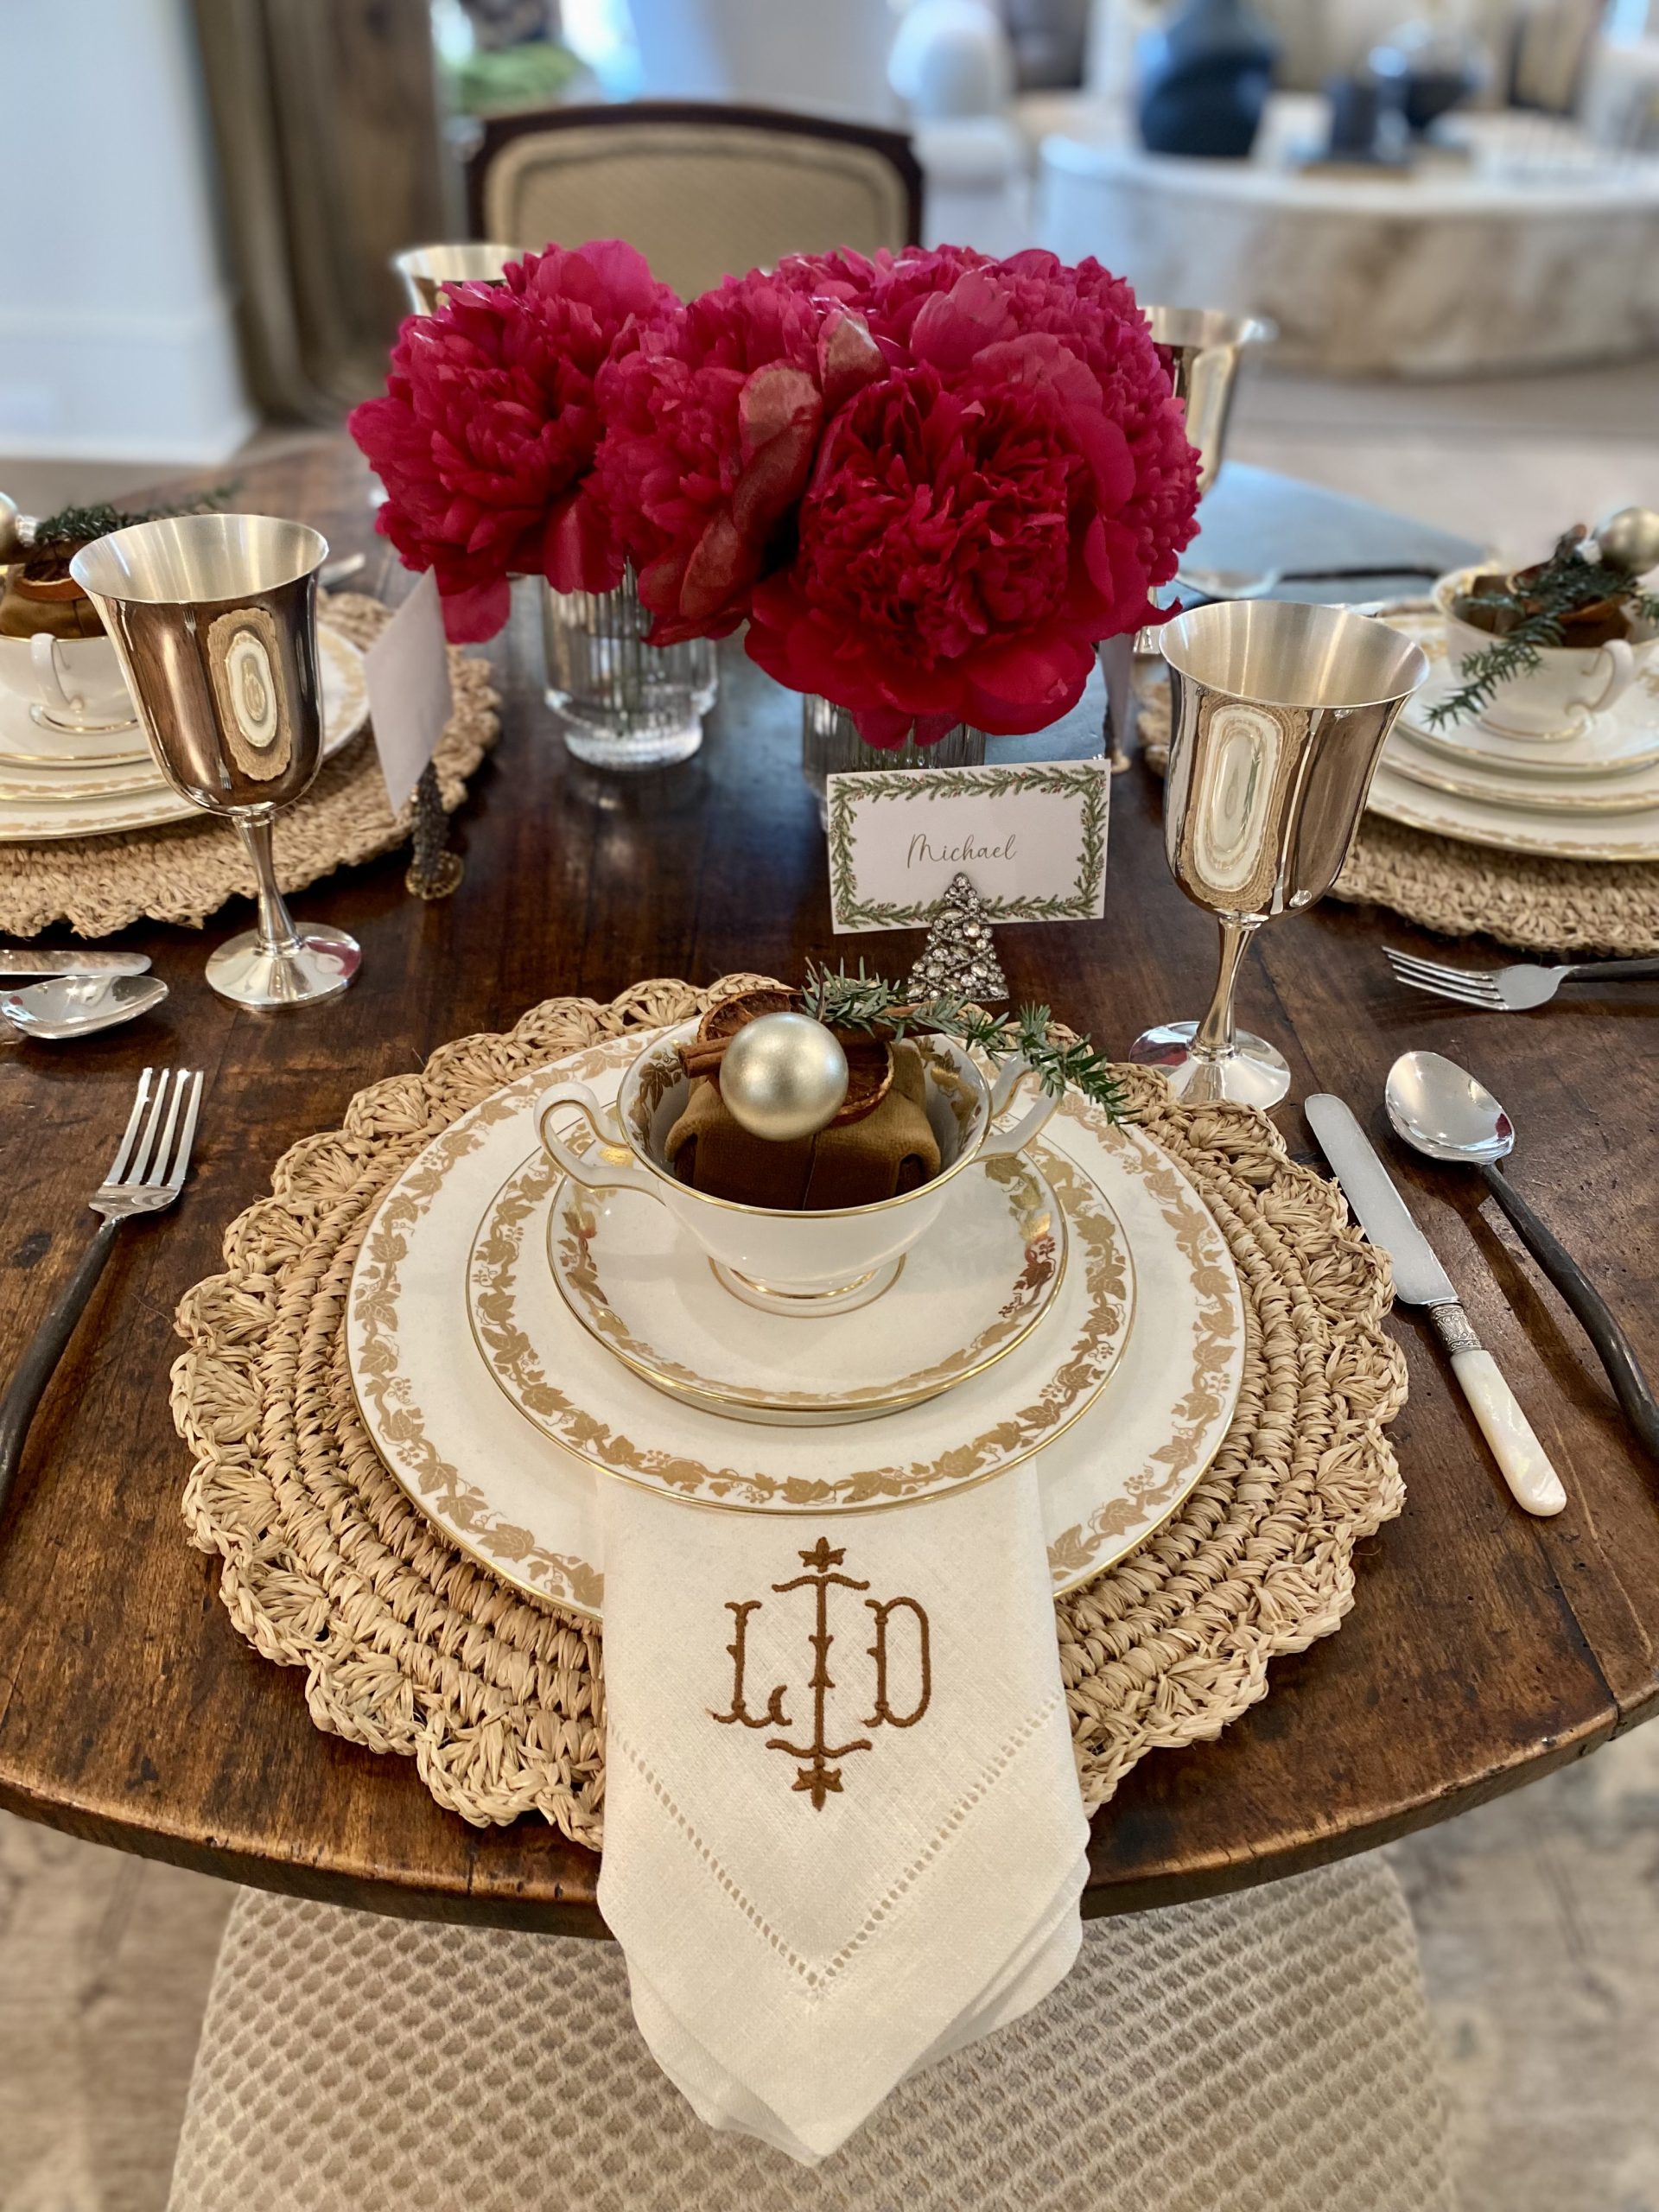 Three Festive Tablescapes For The Holiday & Tips For The Perfect Look